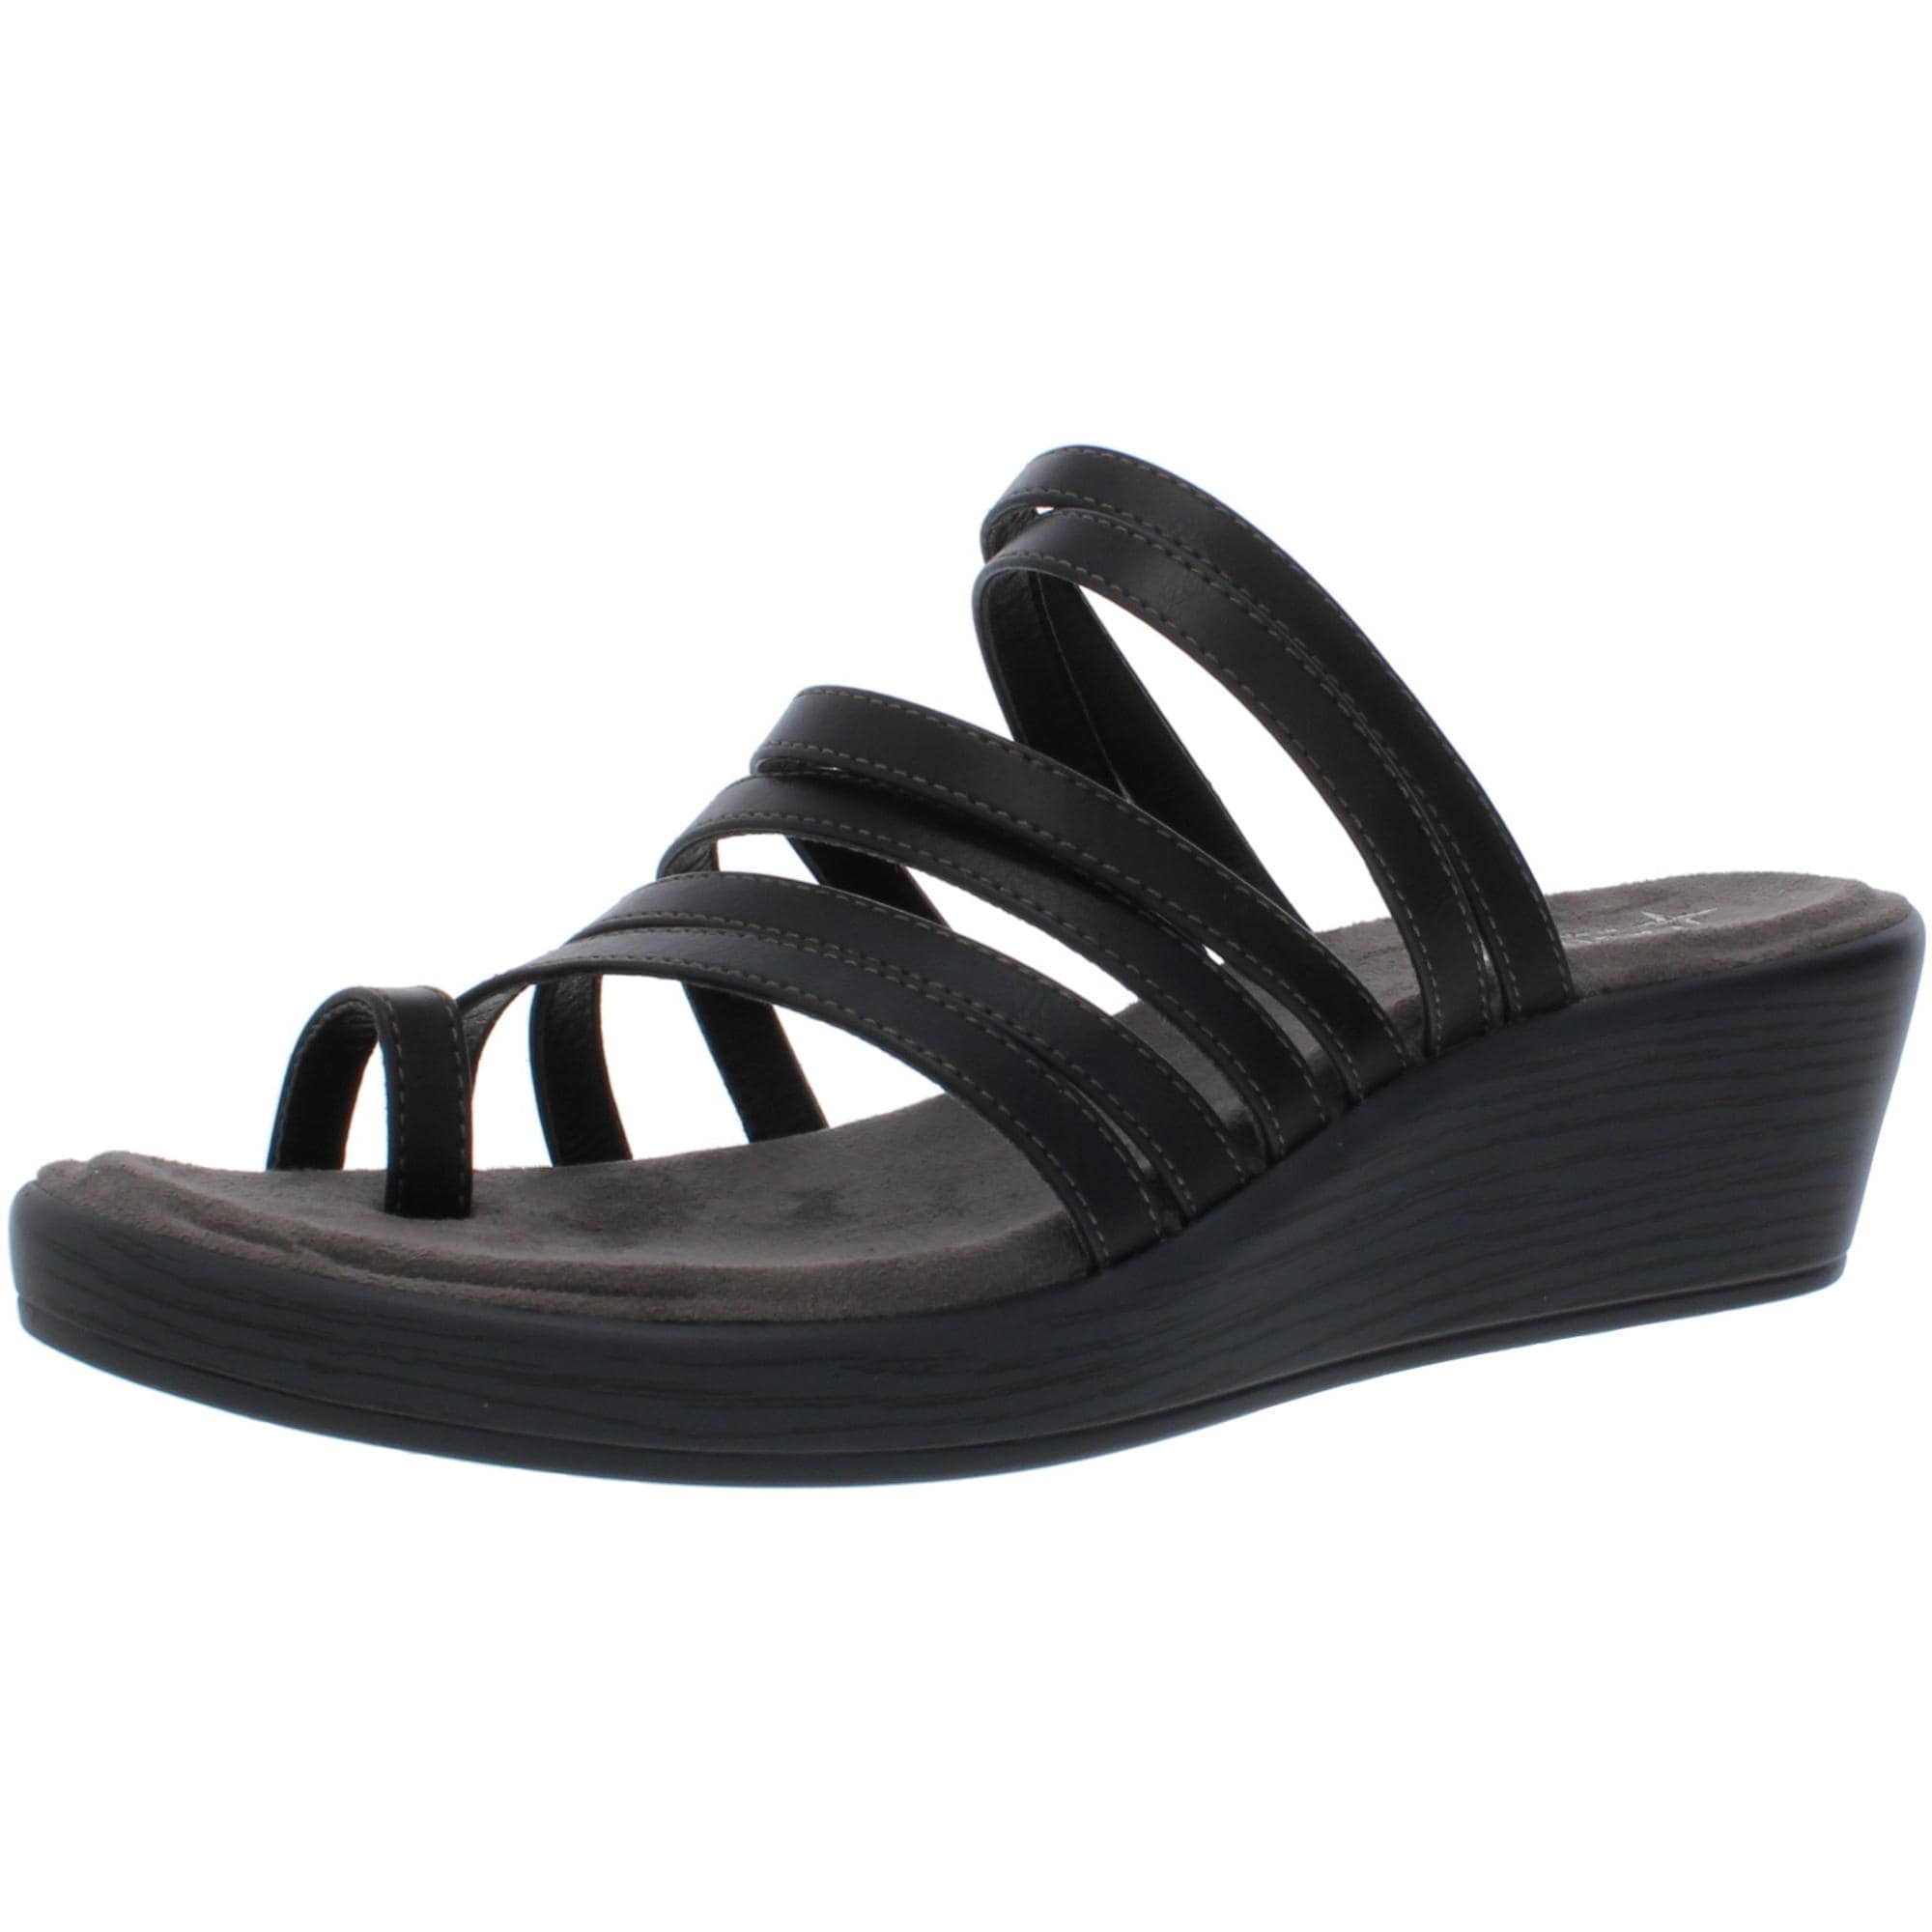 wedge shoes with memory foam